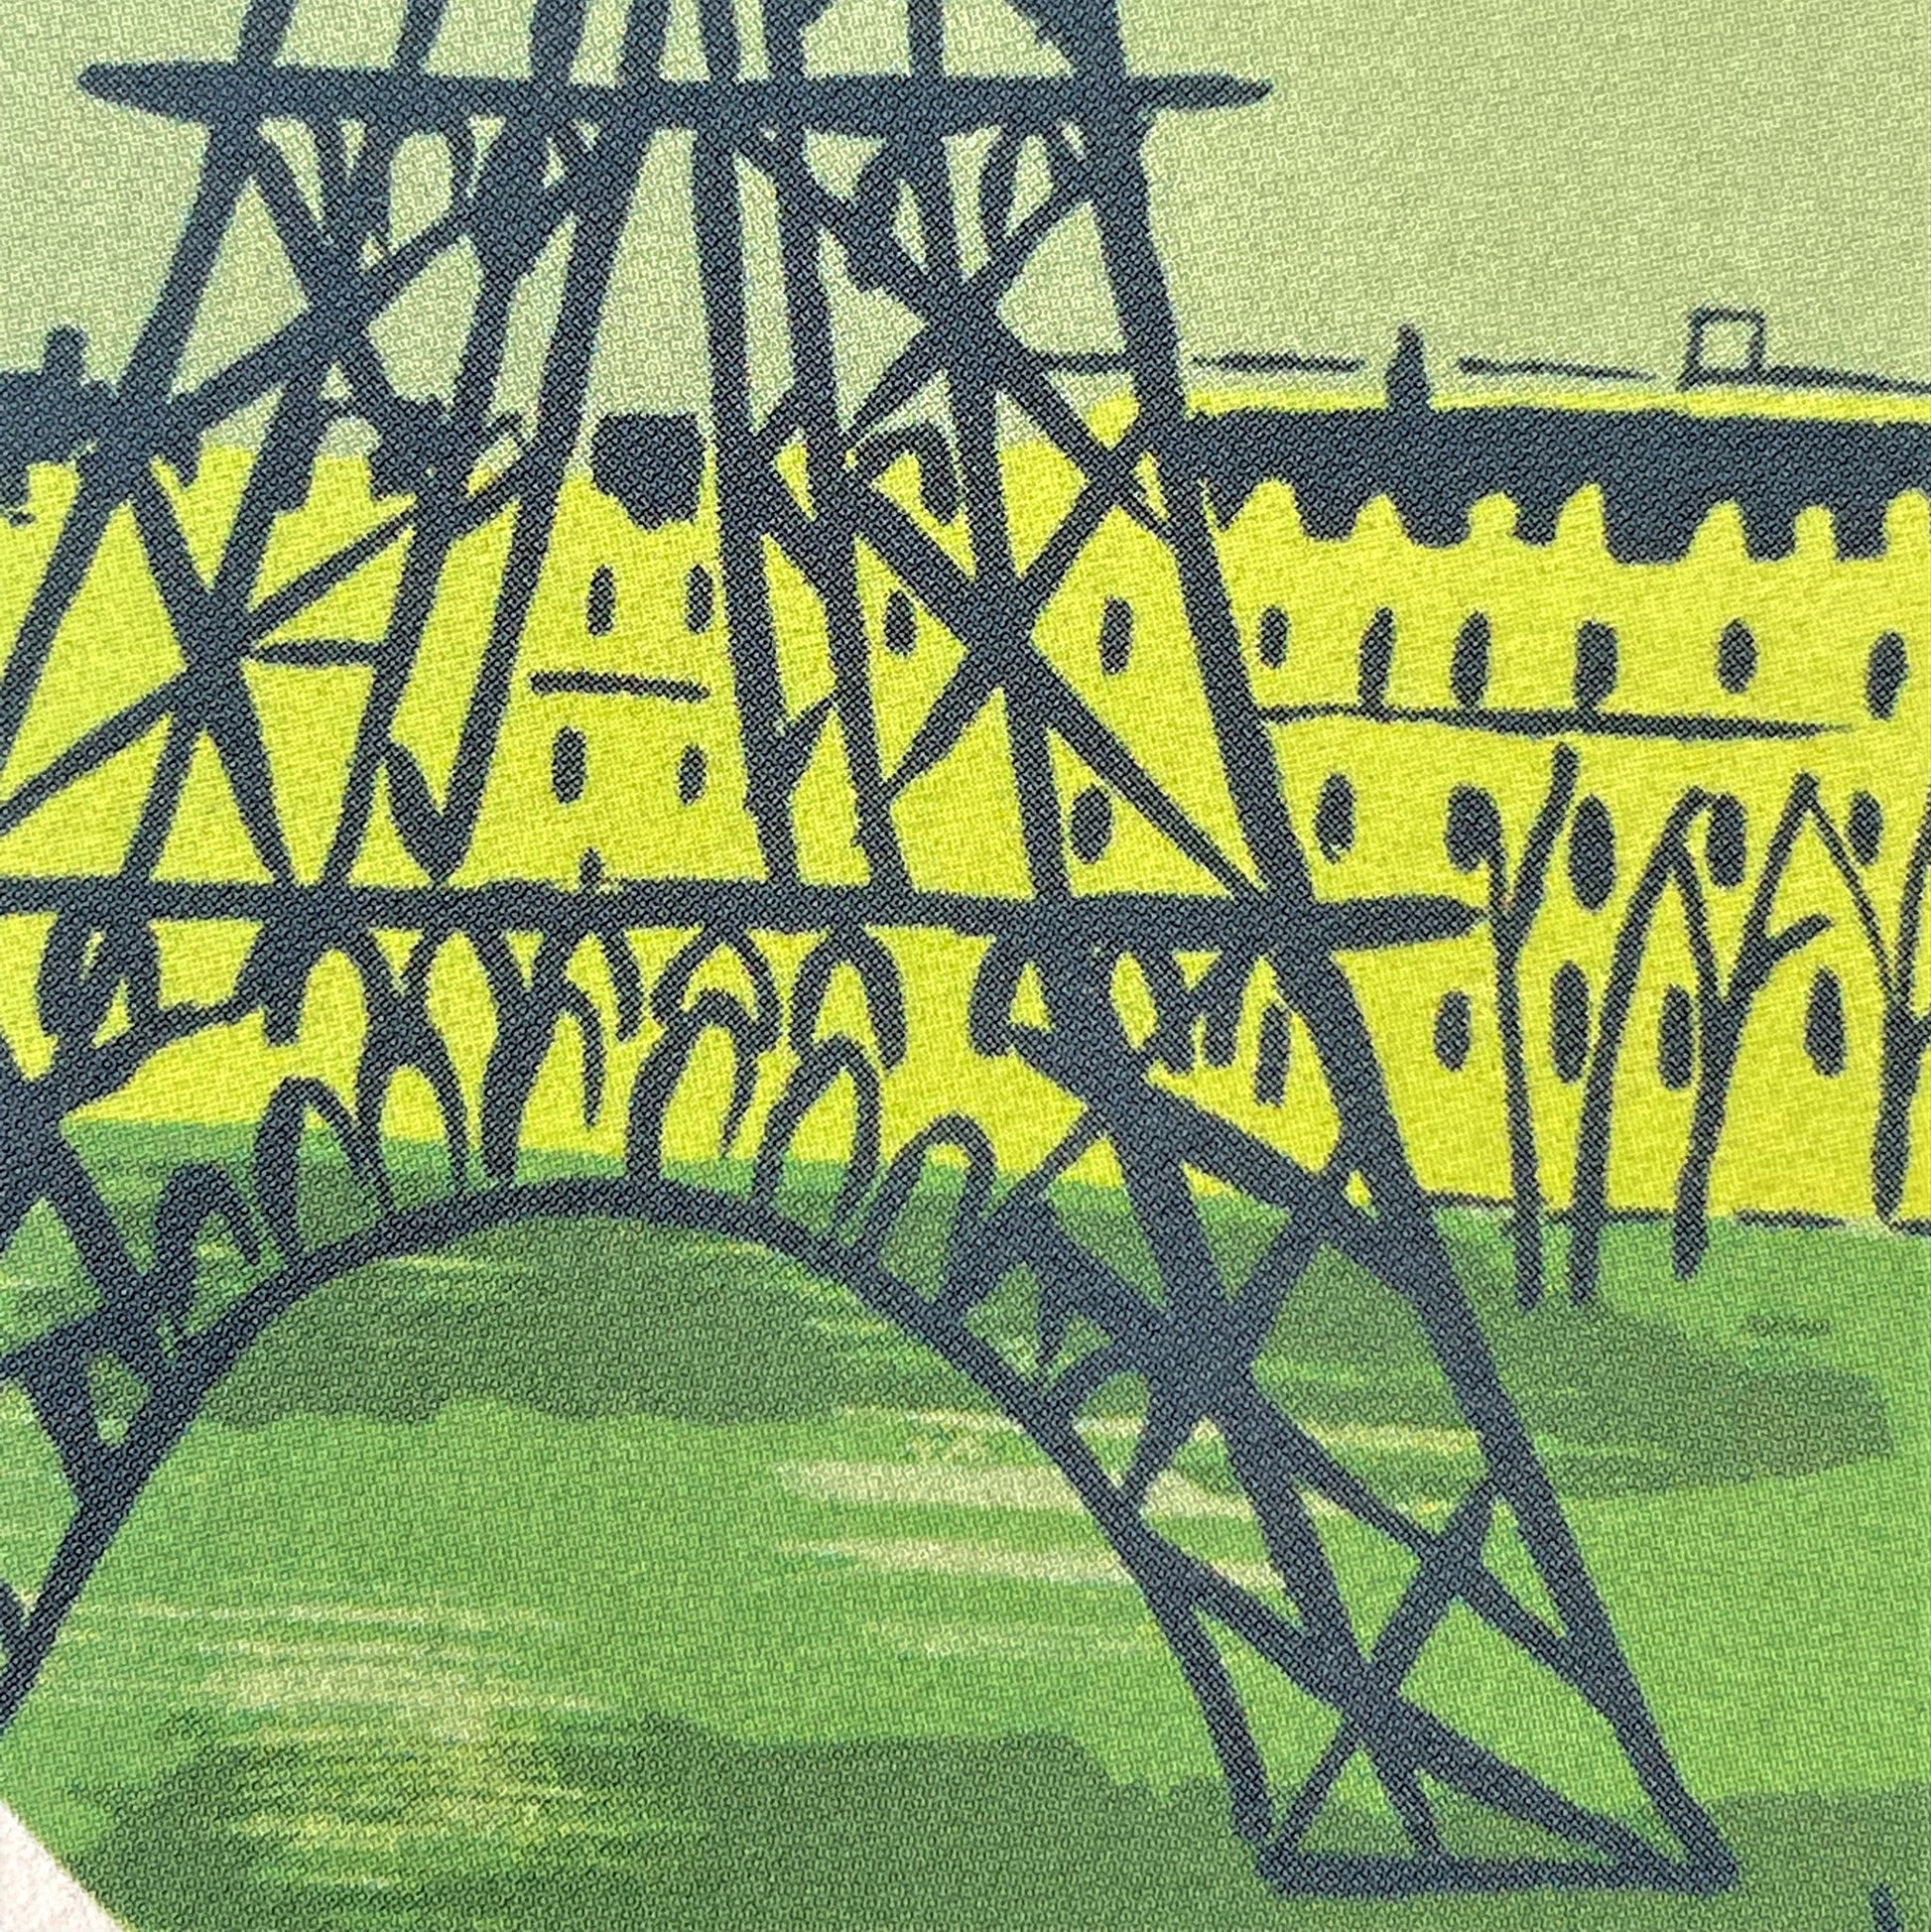 greetings card with drawing of the Eiffel tower, close up of the card